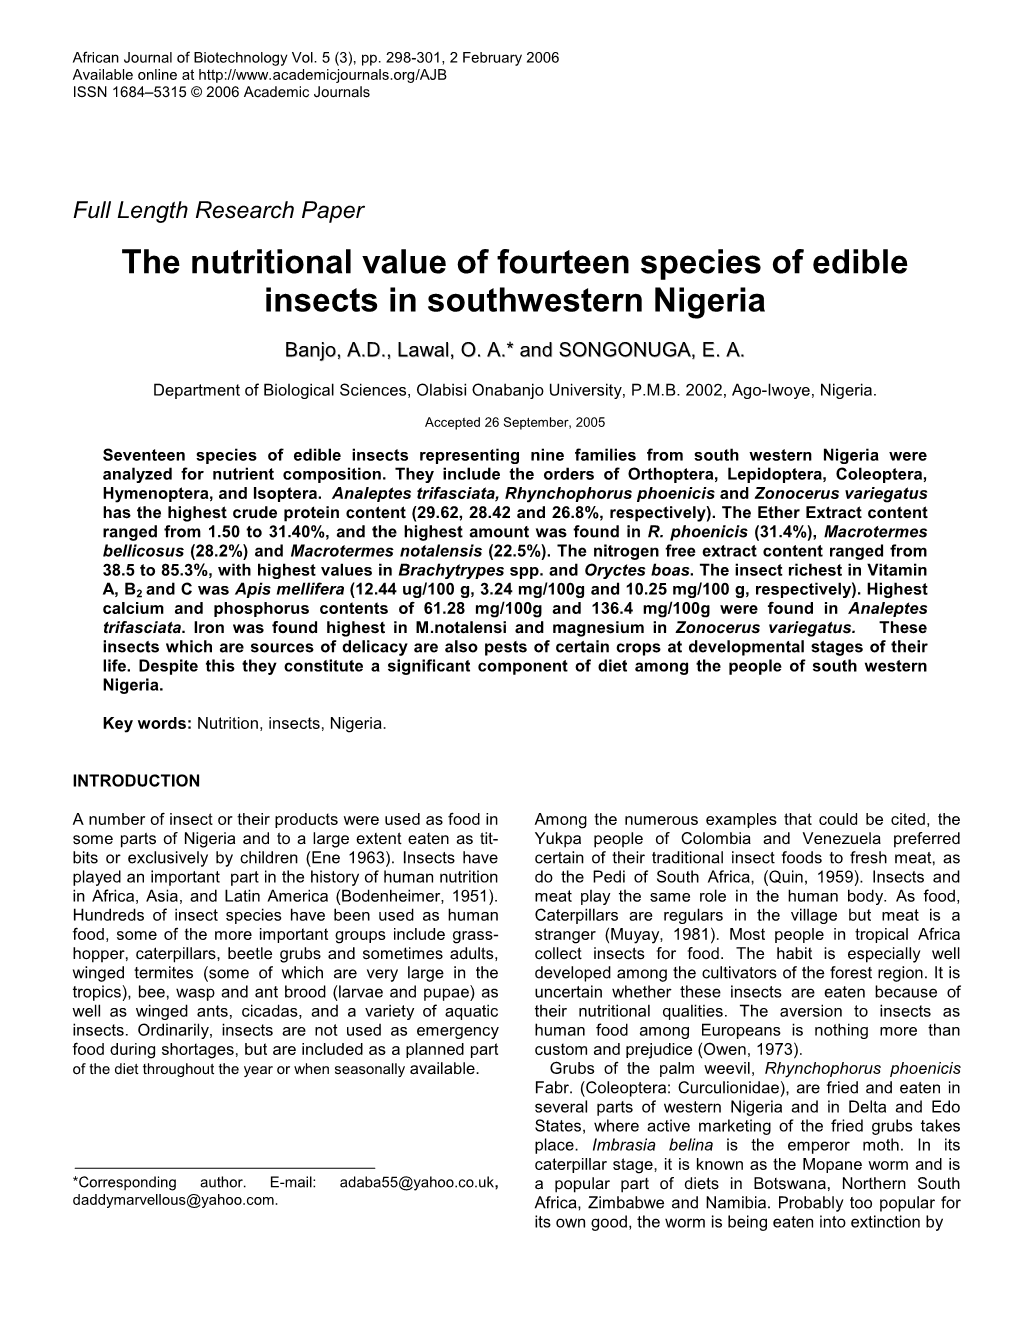 The Nutritional Value of Fourteen Species of Edible Insects in Southwestern Nigeria